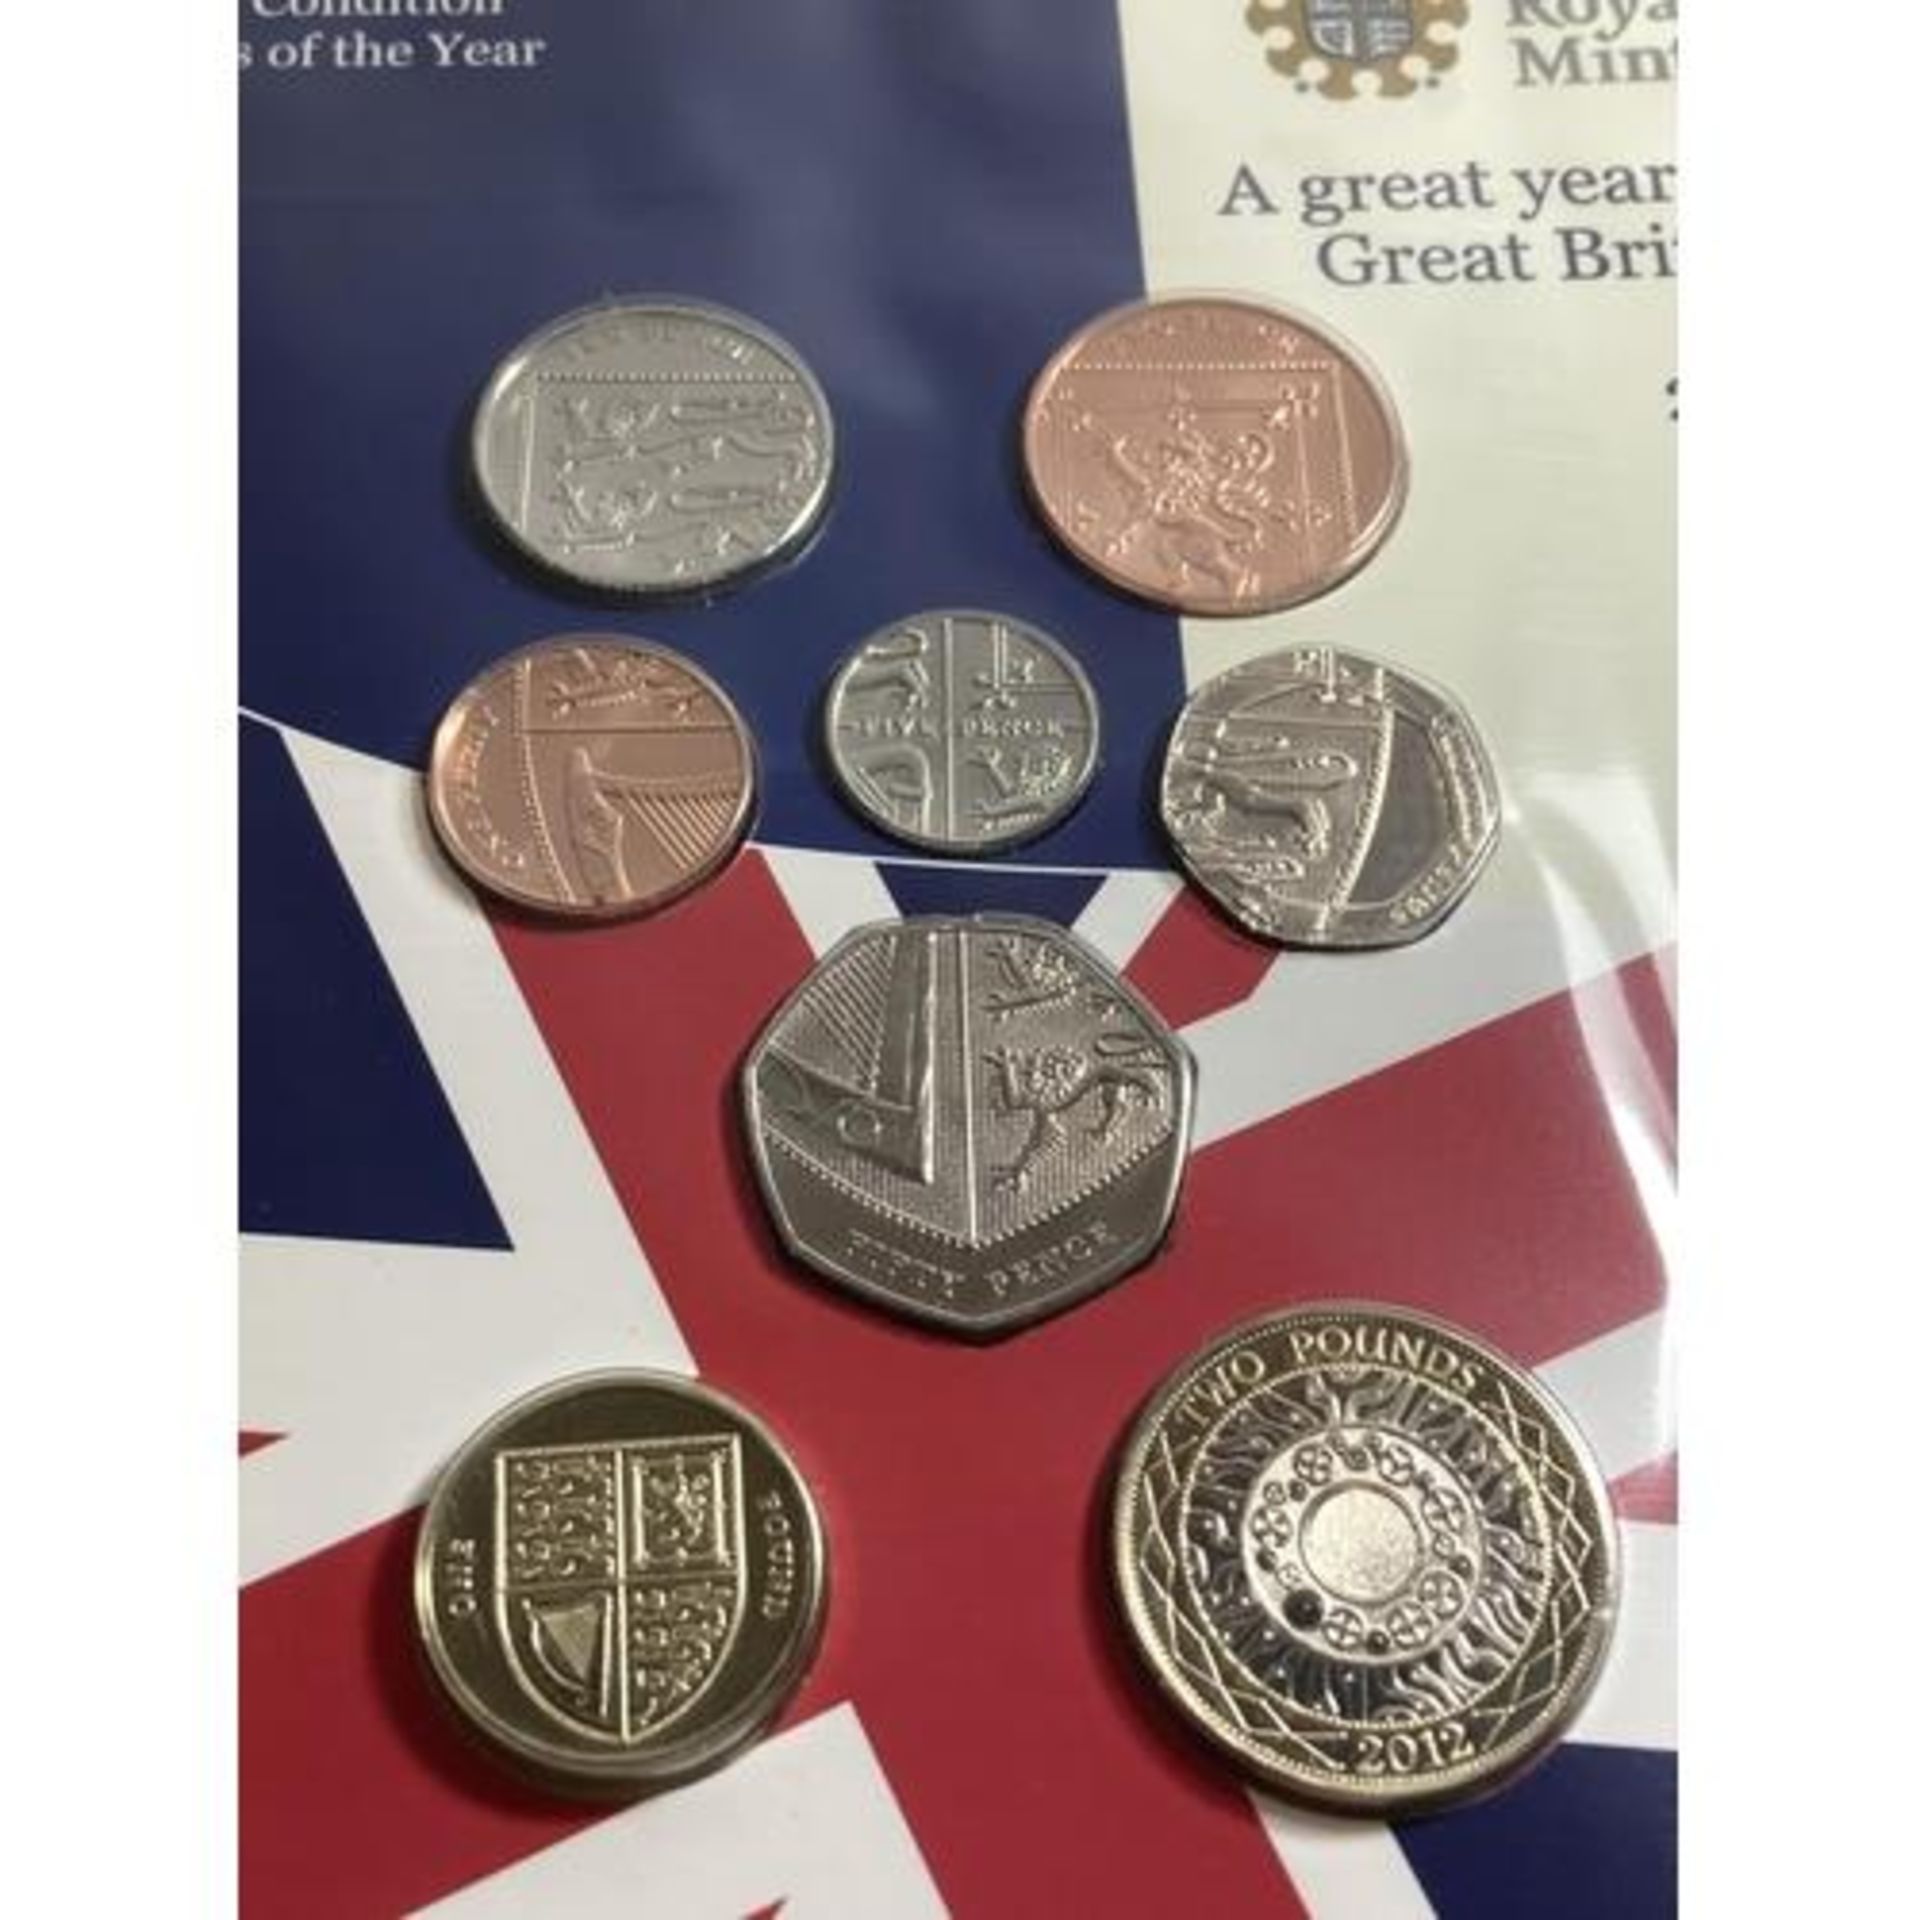 A ROYAL MINT UK 2012 MINT CONDITION COINS OF THE YEAR - Image 2 of 2